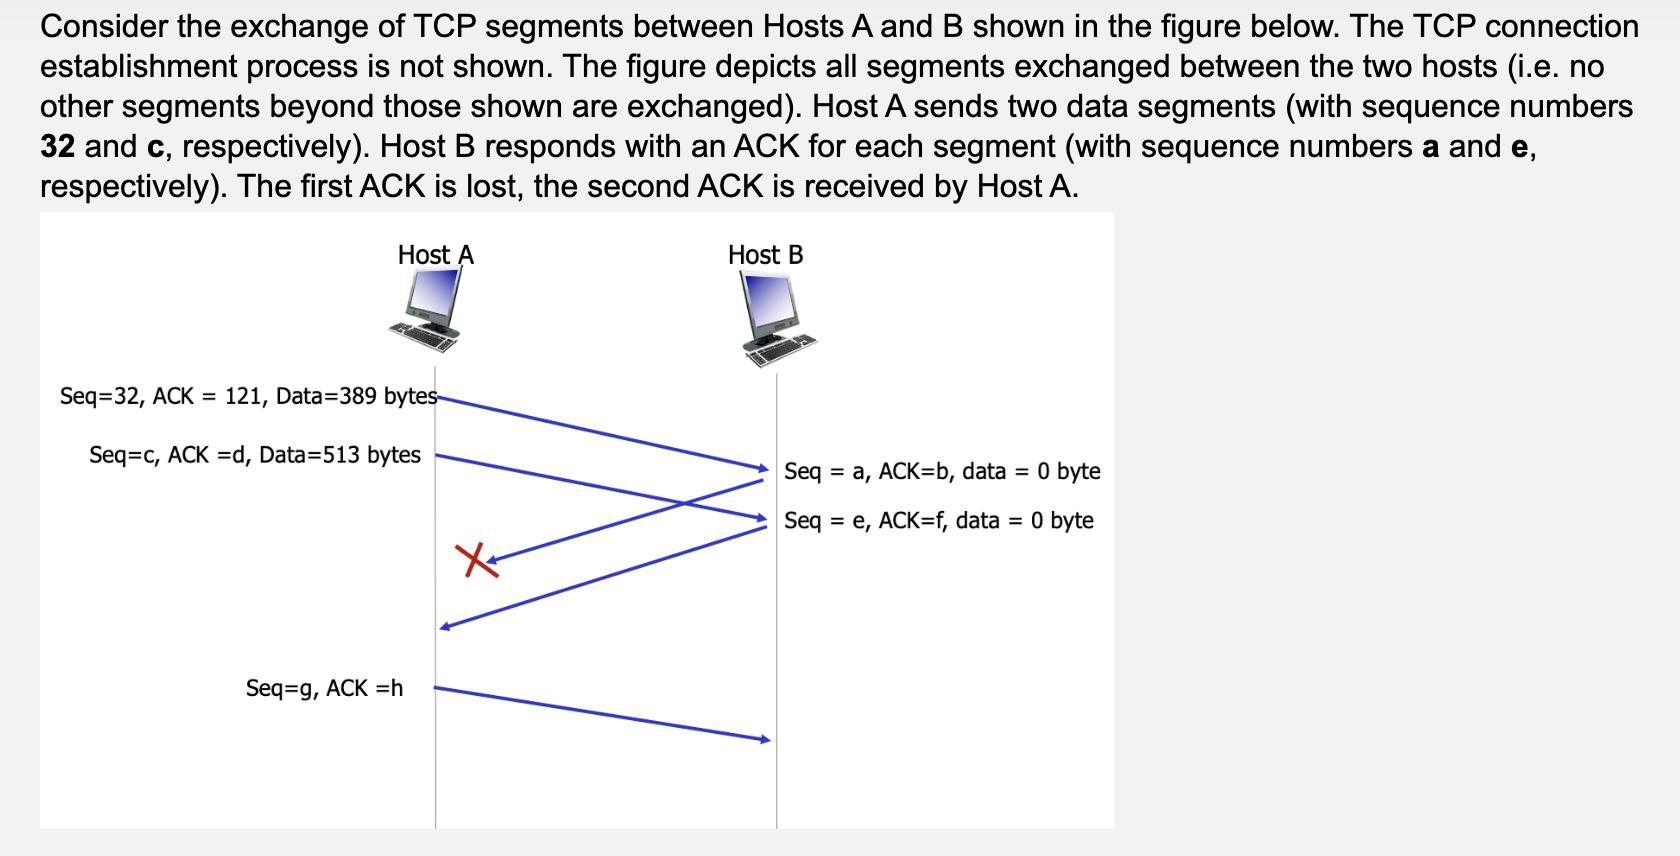 Consider the exchange of TCP segments between Hosts A and B shown in the figure below. The TCP connection